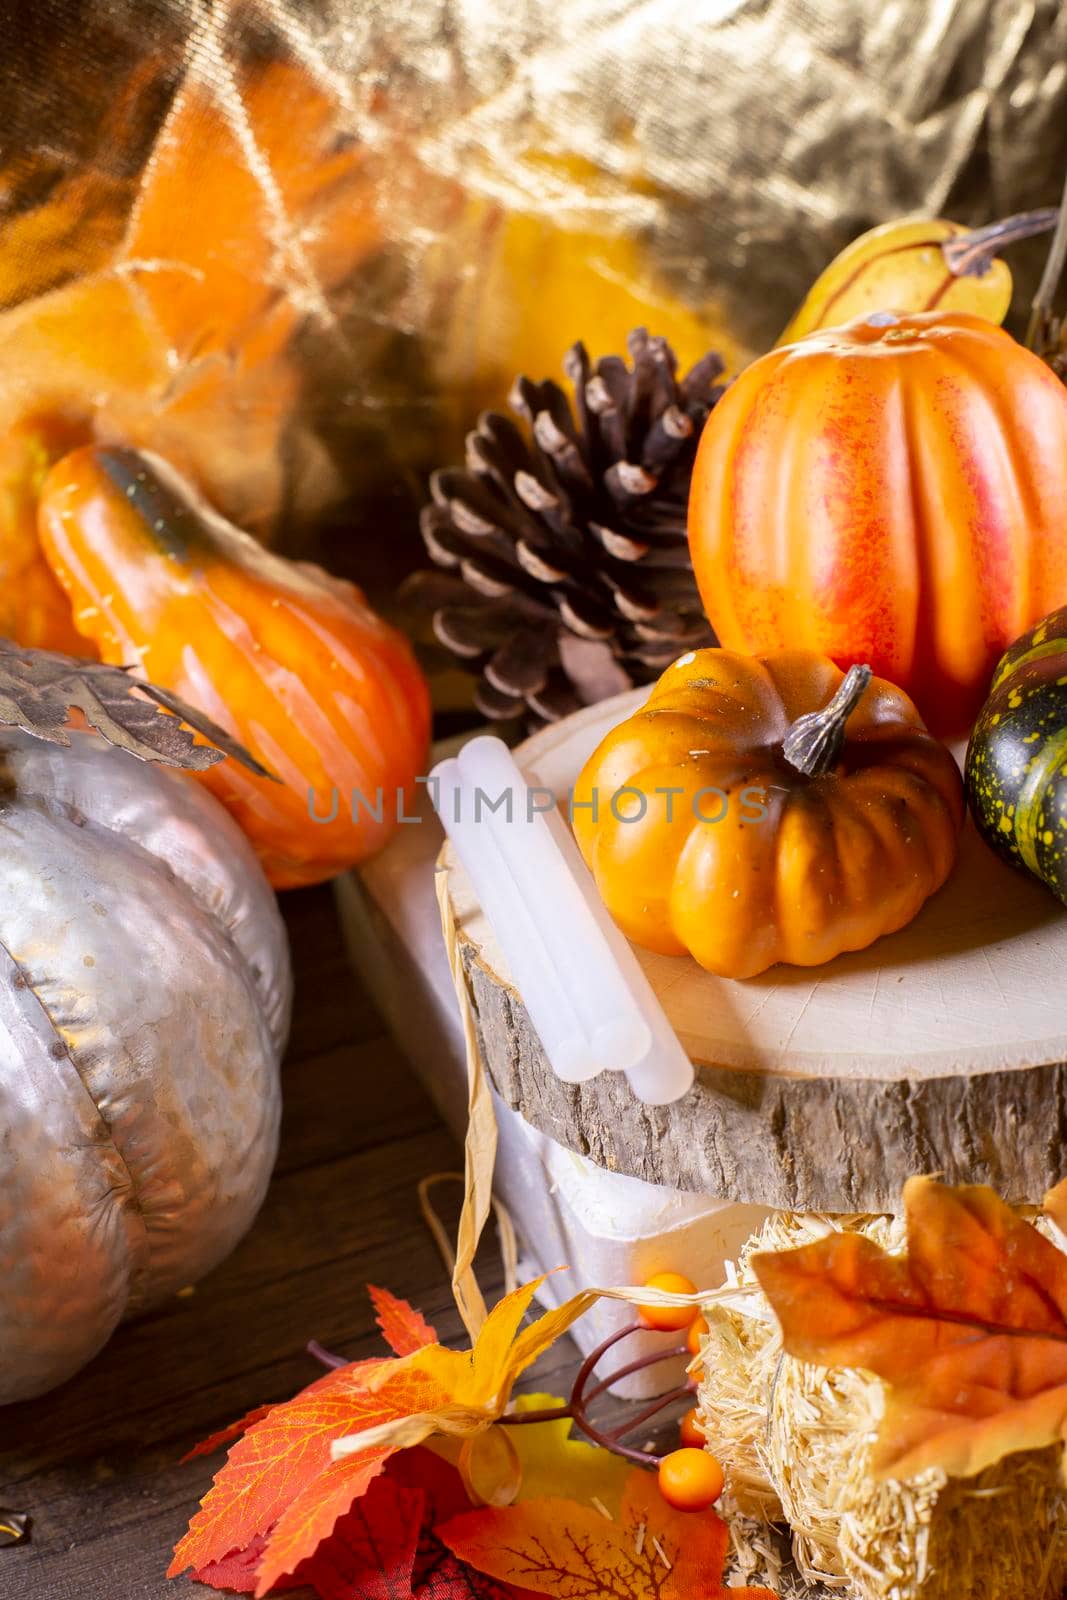 Small orange pumpkins, orange squash, pinecones, a green squash, and glue sticks for crafting on wood stacked on leaf-covered hay next to a silver pumpkin with a golden background